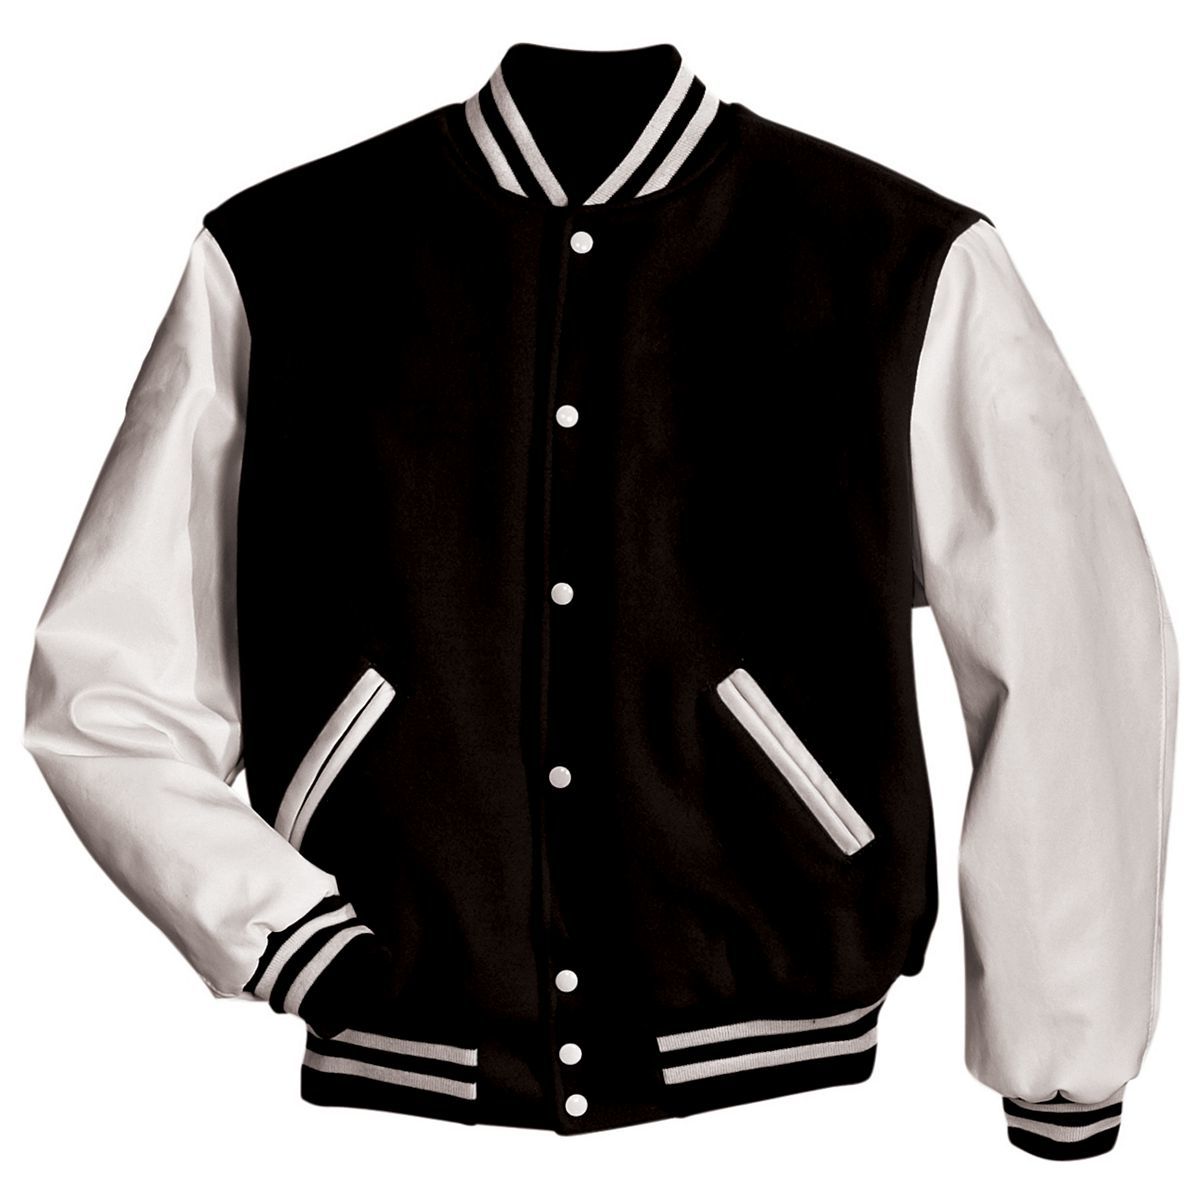 Holloway Award Jacket in Black/White  -Part of the Adult, Adult-Jacket, Holloway, Outerwear product lines at KanaleyCreations.com